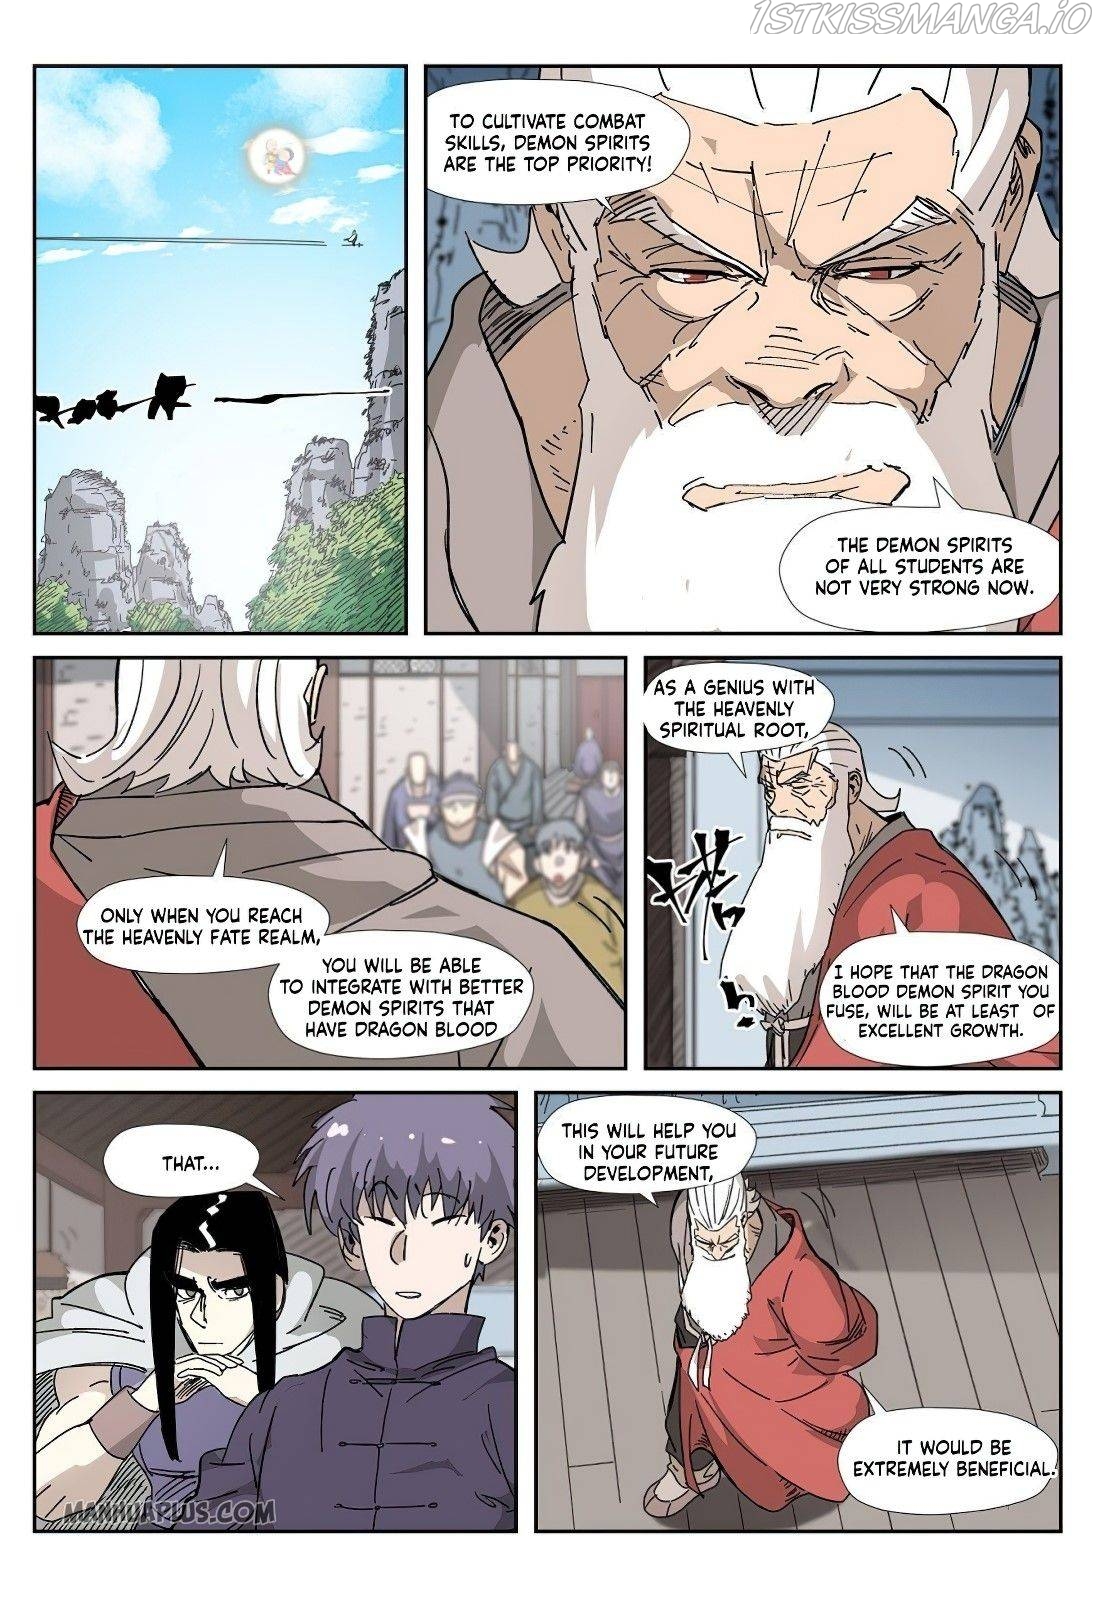 Tales of Demons and Gods Manhua Chapter 328.5 - Page 3